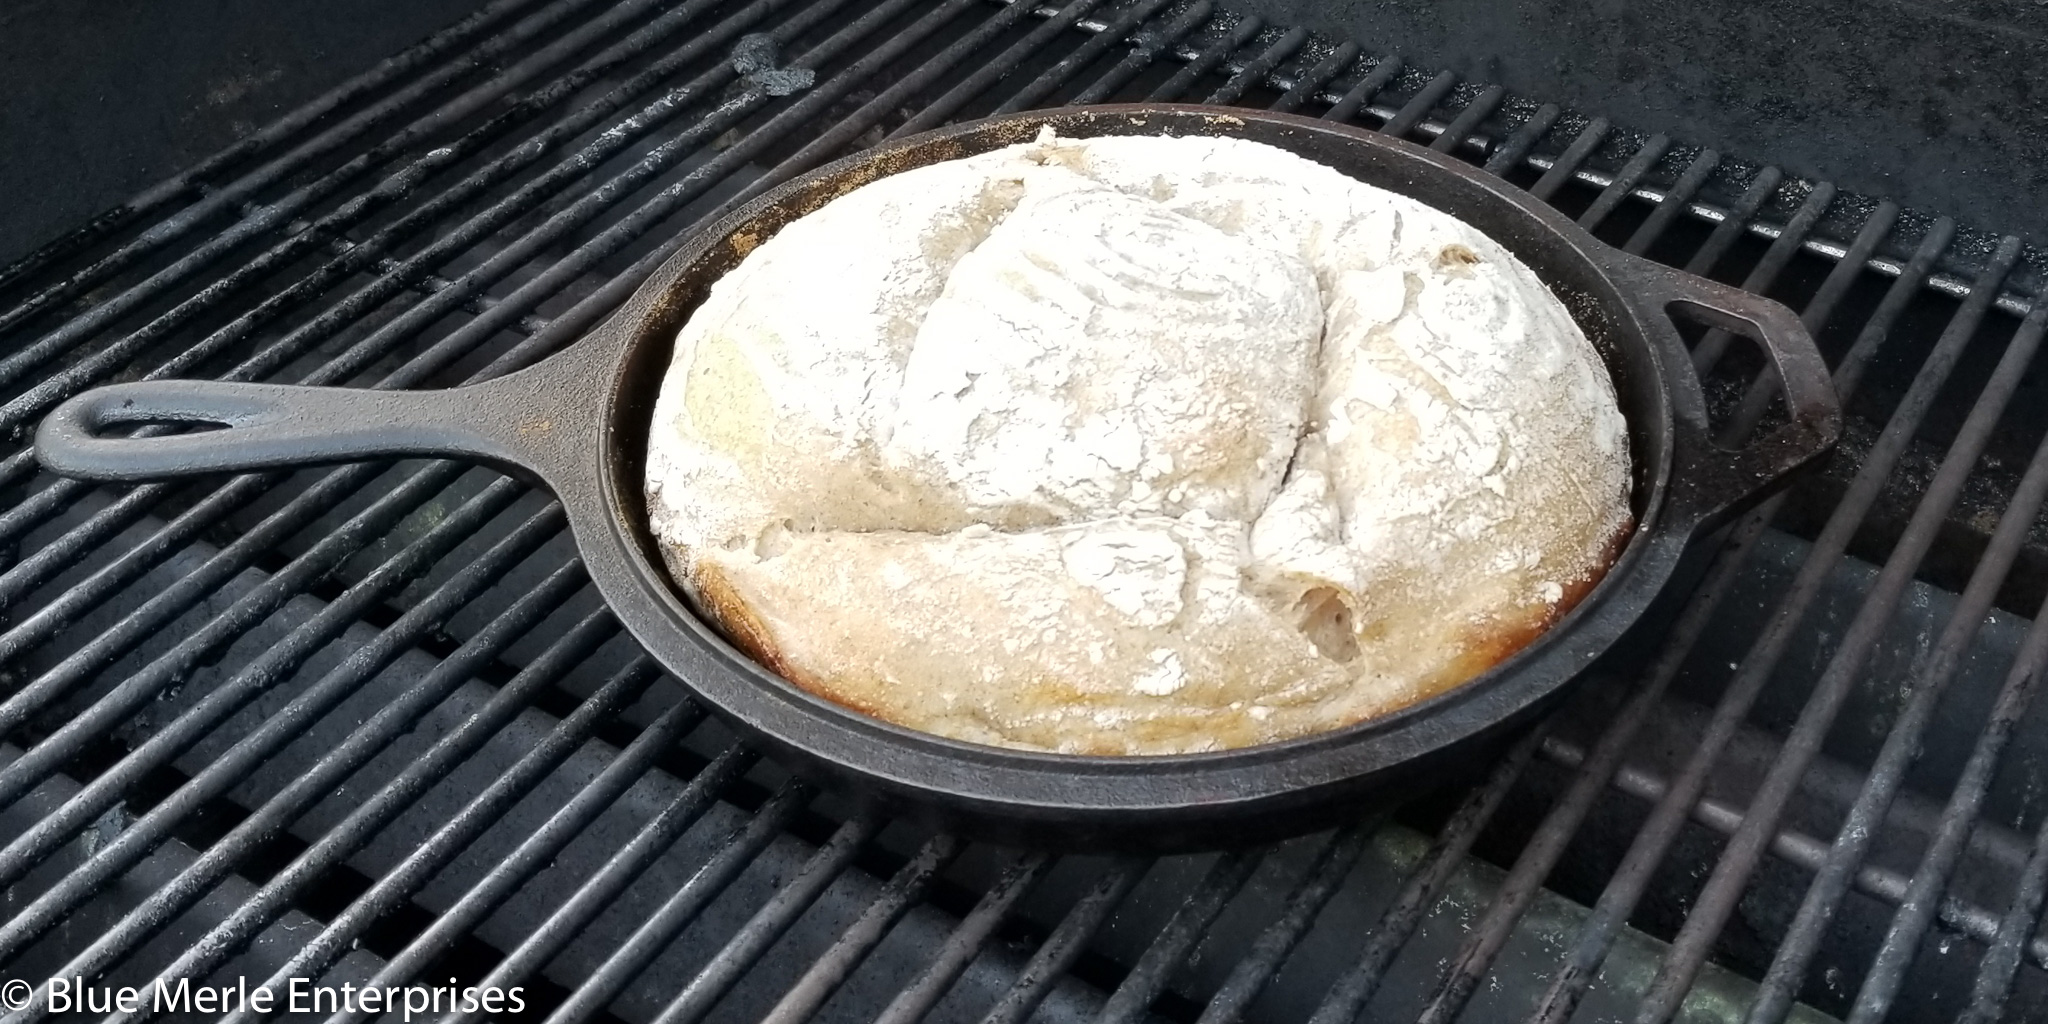 Sourdough Bread Baked on the Grill – Kayla's Kitchen